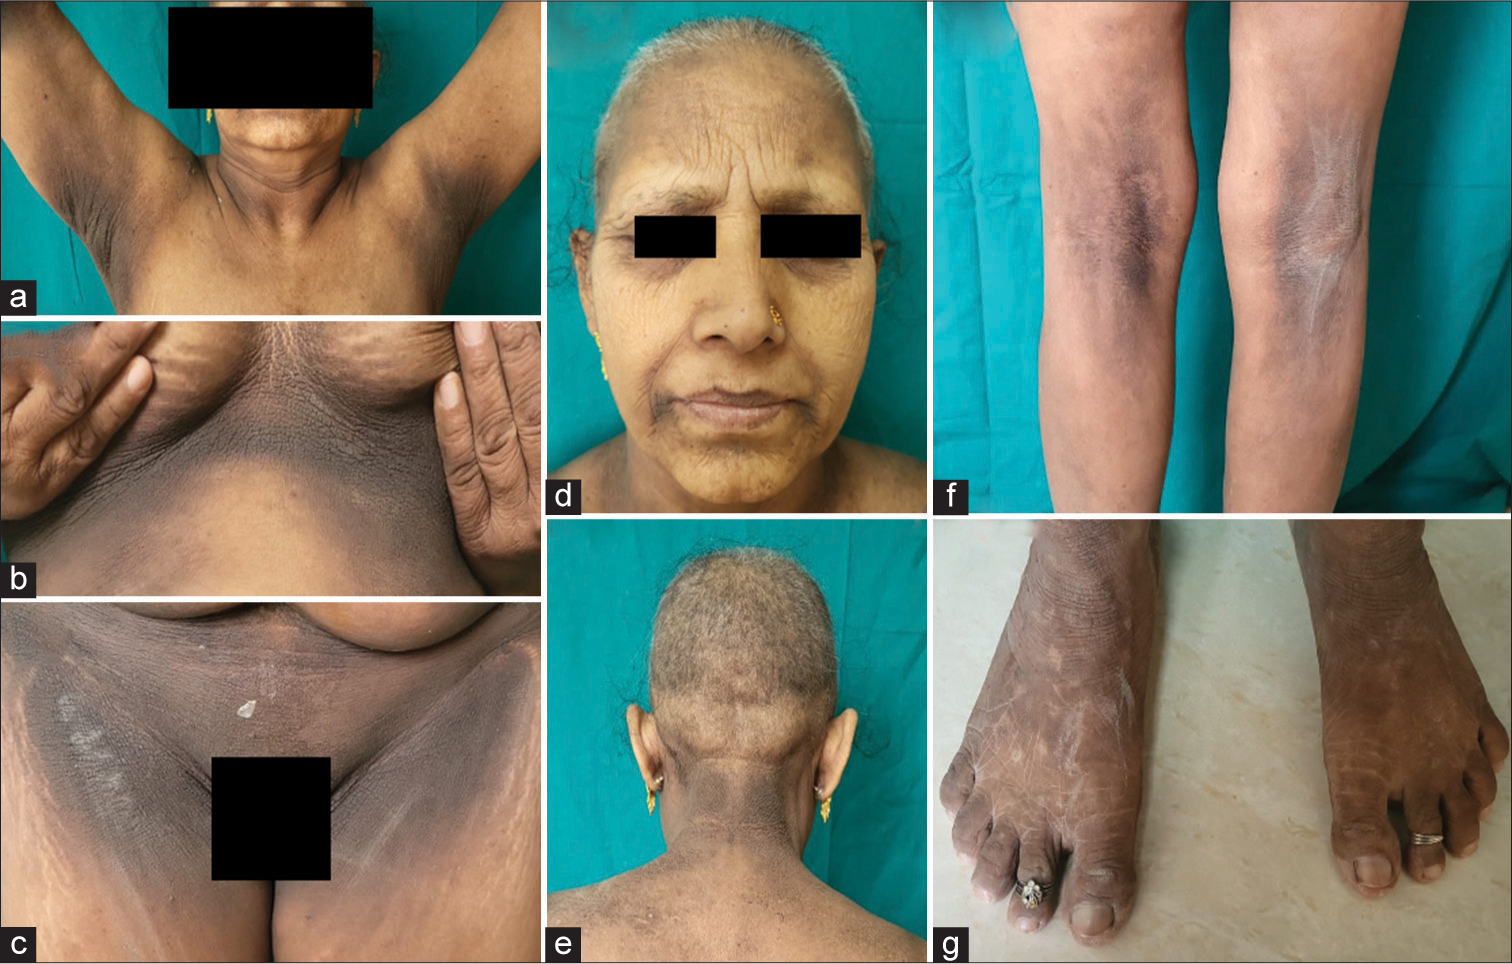 Acanthosis Nigricans as a Marker of Ovarian Carcinoma